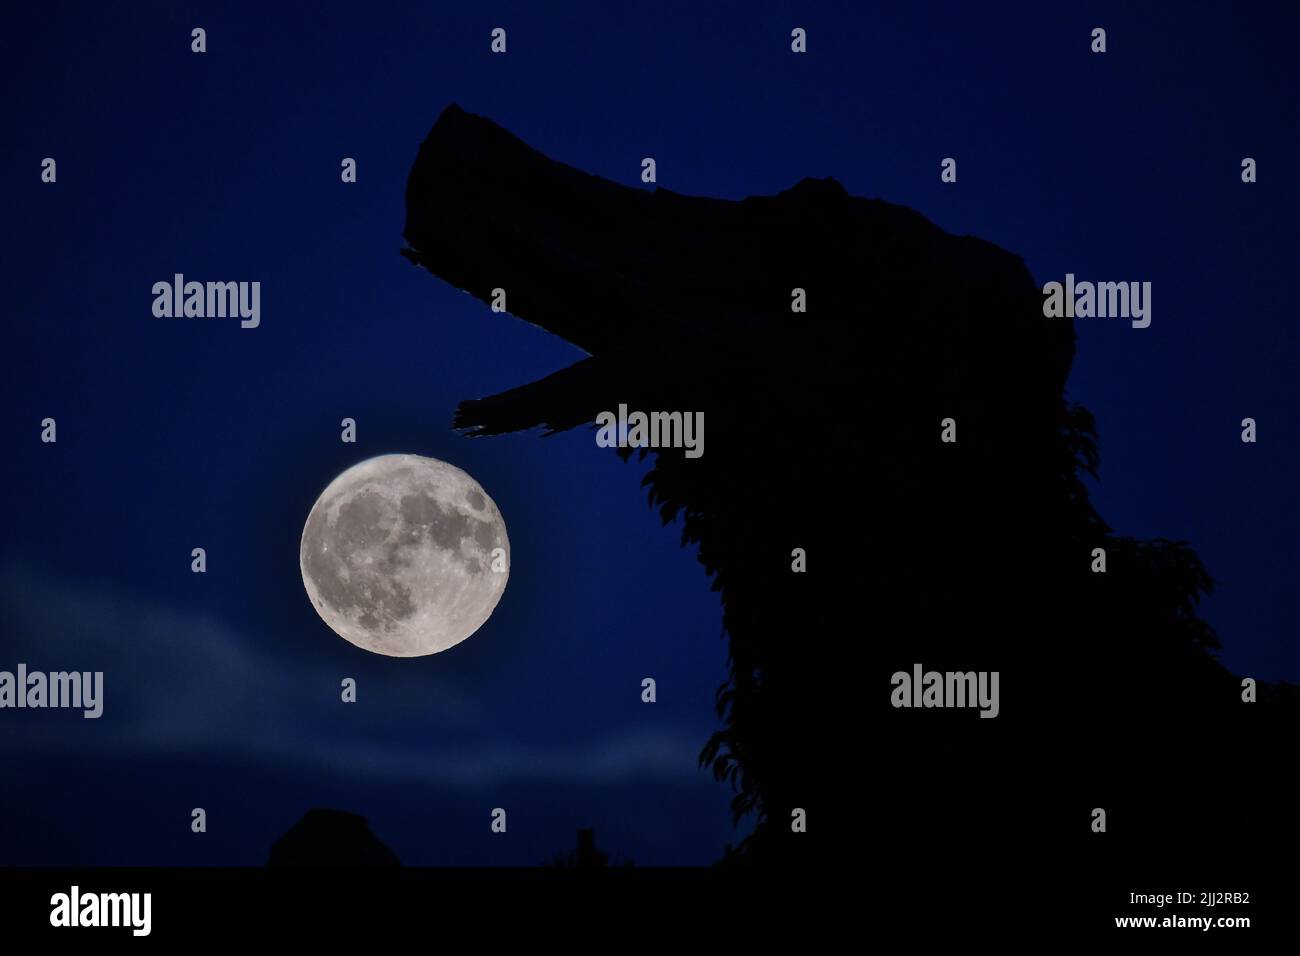 Ironbridge, Shropshire, UK. June 13th 2022 Jurassic Moon. Last nights full moon casts Jurassic like moonlight over the Ironbridge Gorge with the moon silhouetting the remains of an old tree stump appearing like a dinosaur. Stock Photo